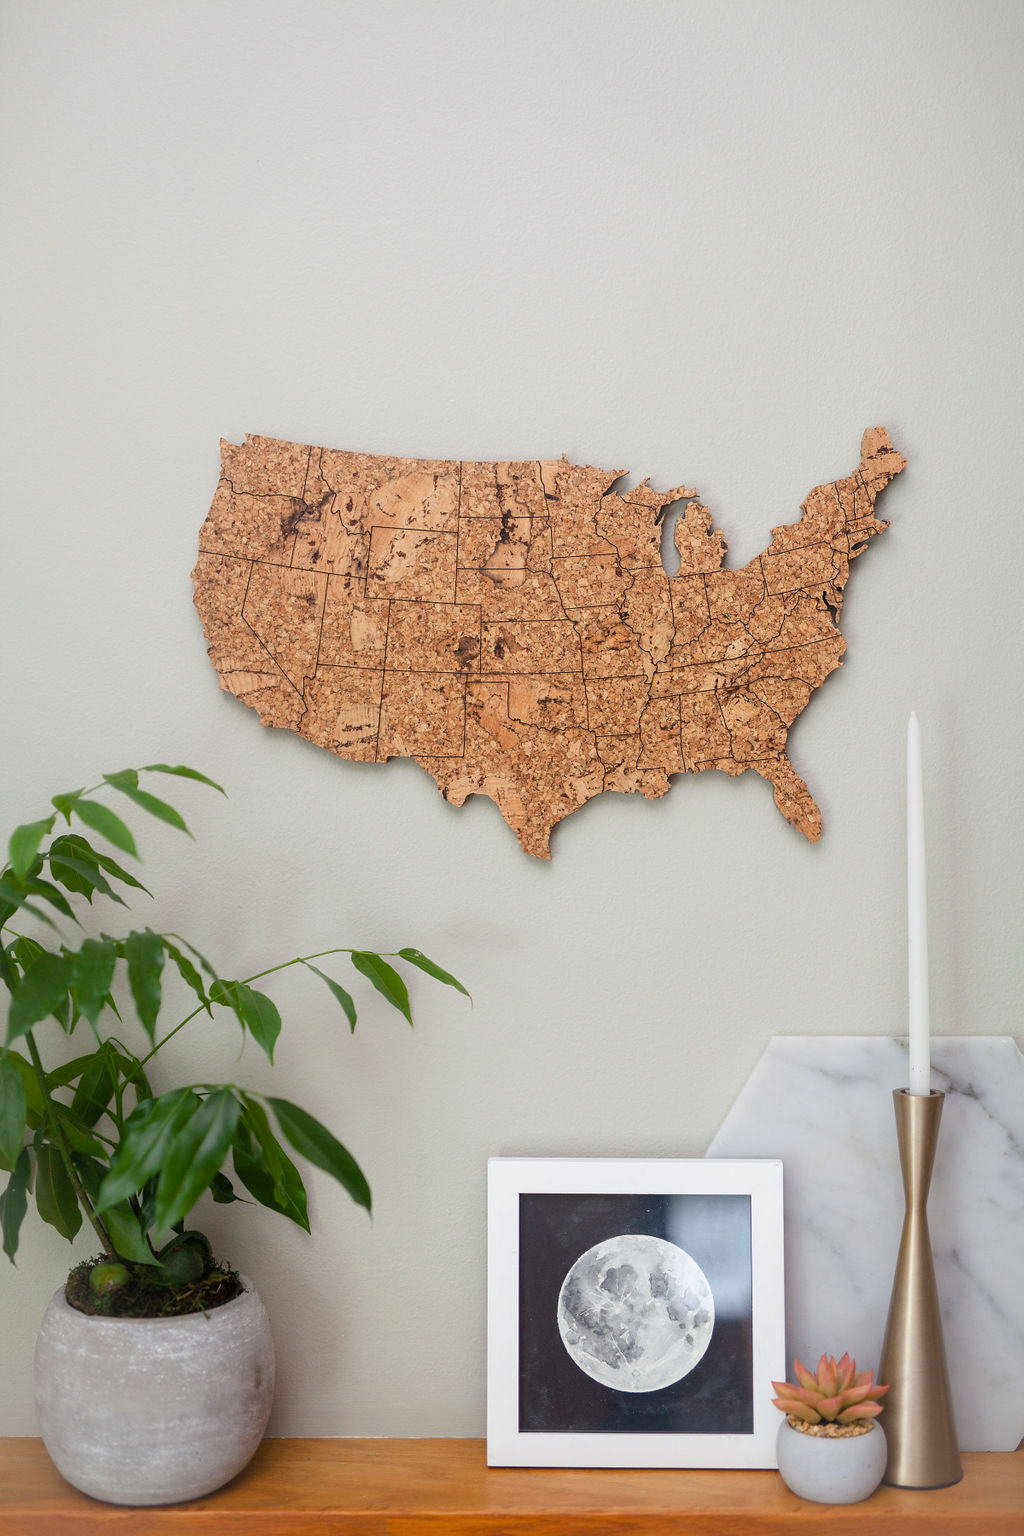 GEO 101 Design - Cork Map of the United States - Small Size